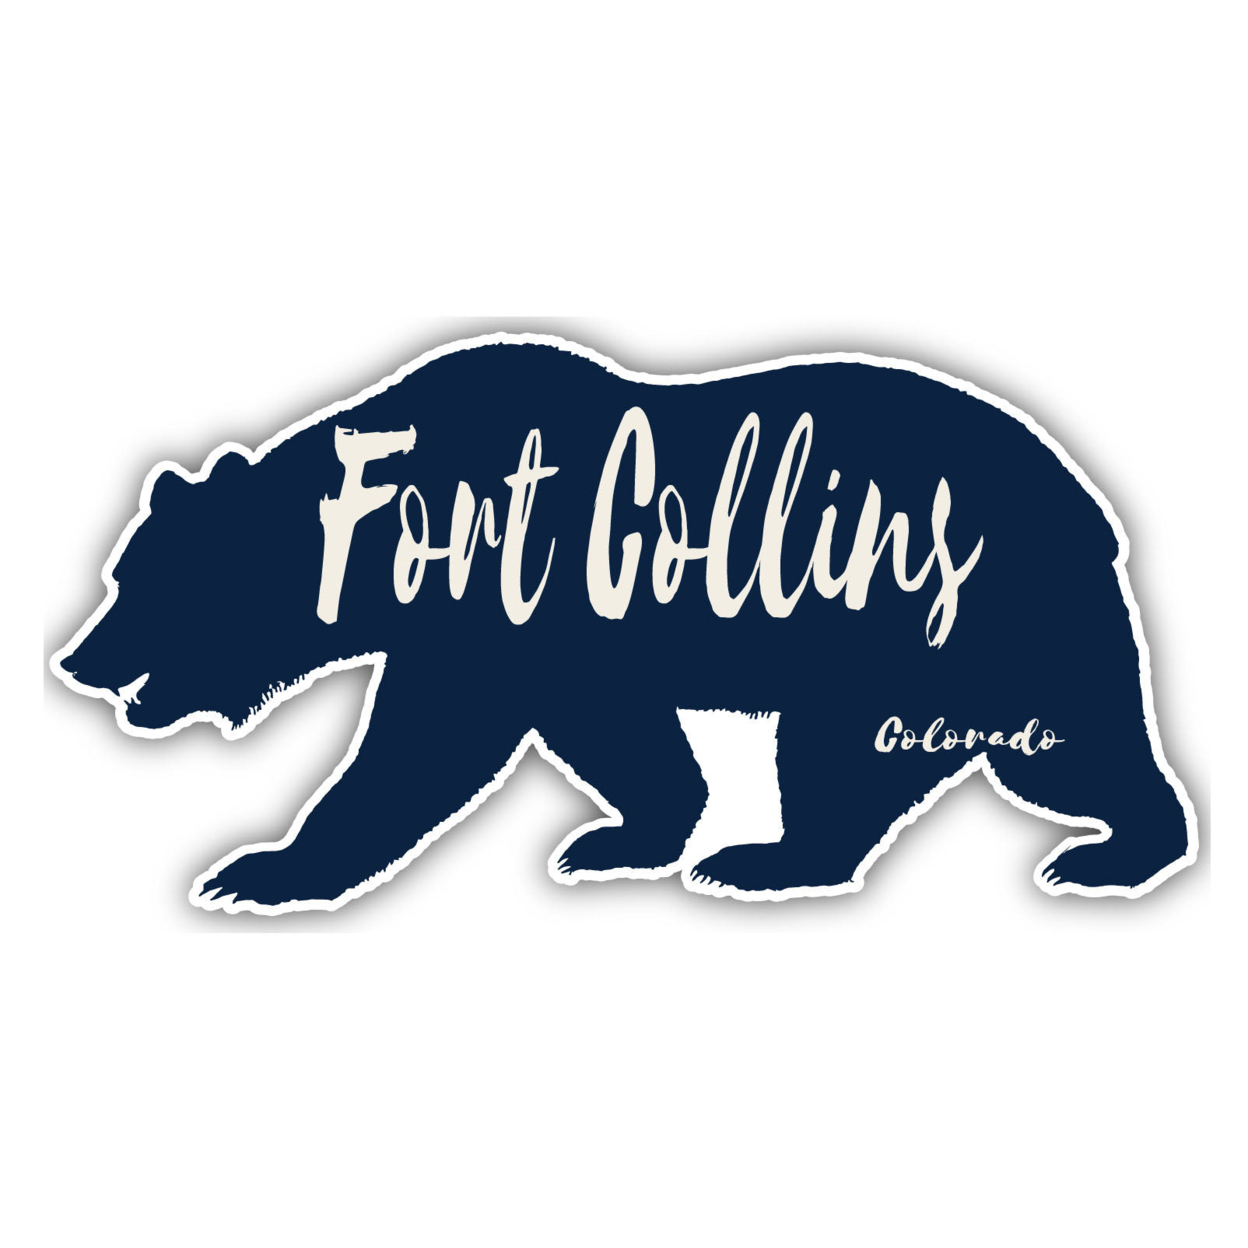 Fort Collins Colorado Souvenir Decorative Stickers (Choose Theme And Size) - 4-Pack, 4-Inch, Great Outdoors